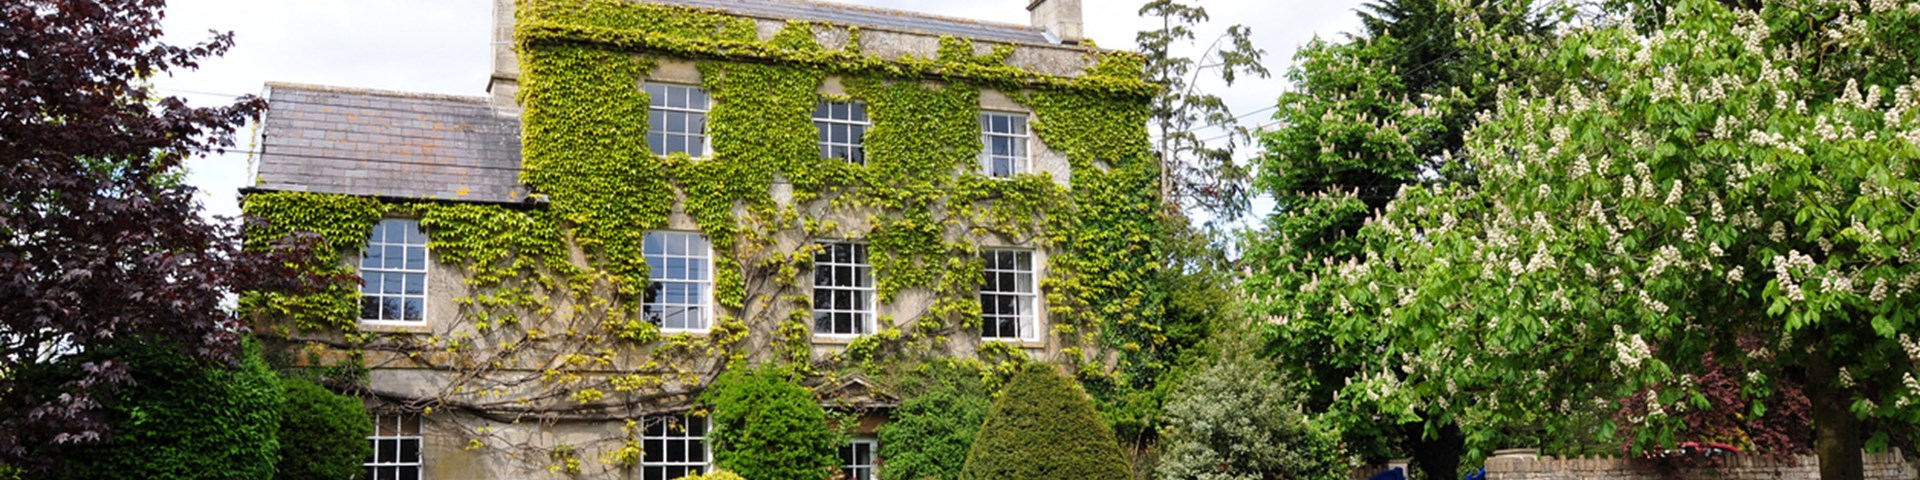 Large house and garden covered in ivy